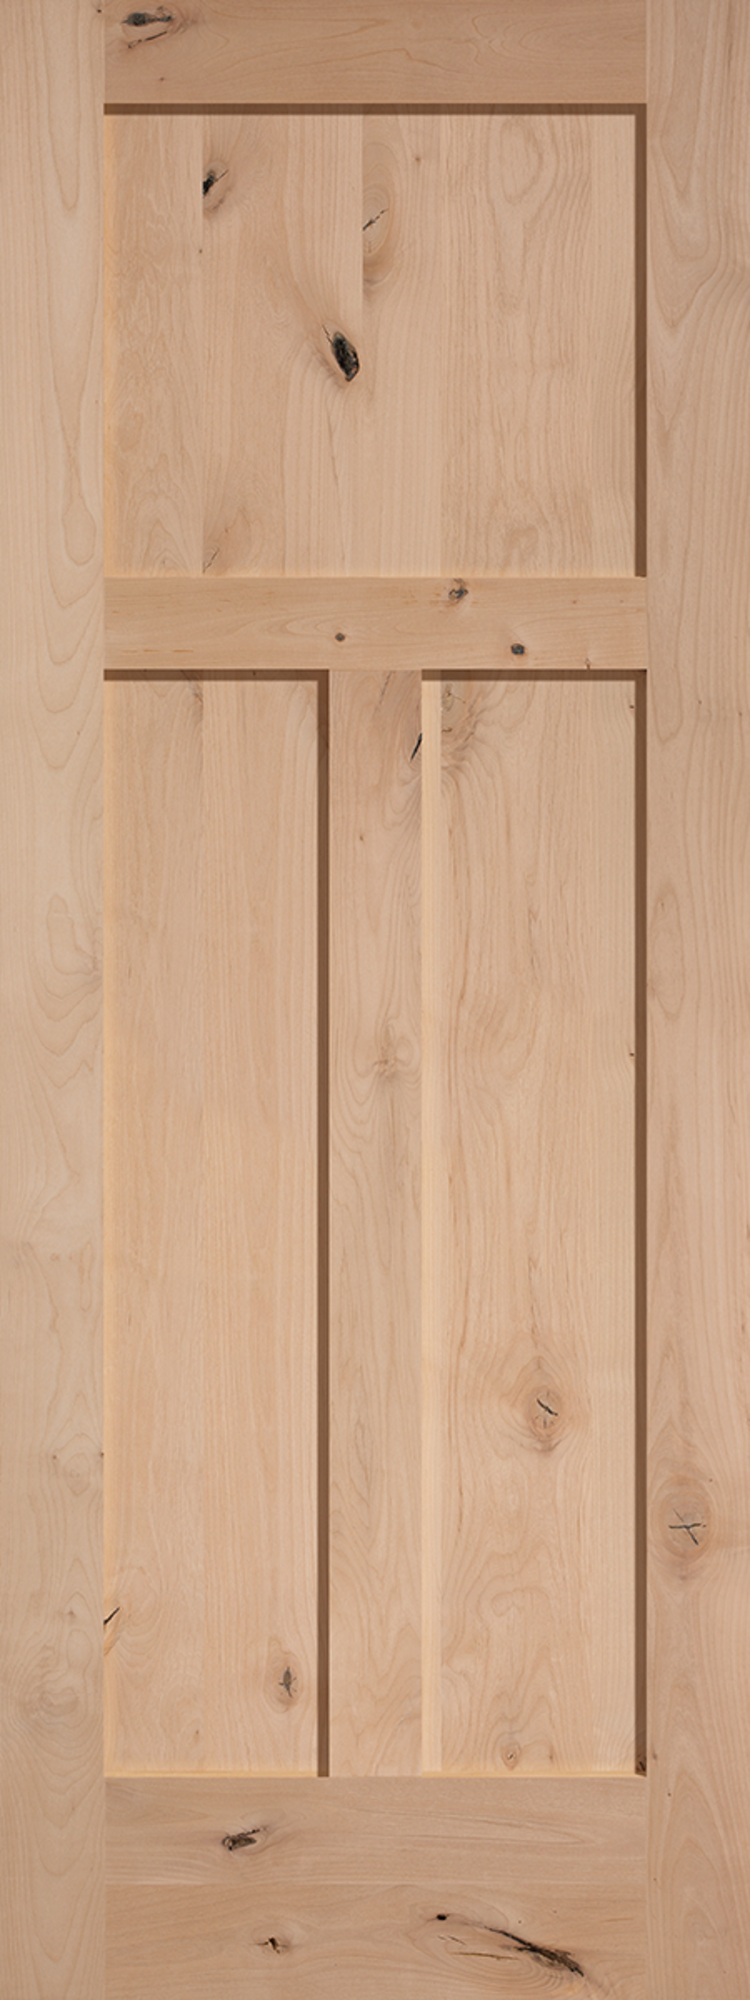 Knotty alder wood door for home’s interior features a Craftsman style, with a square panel above two long, vertical panels